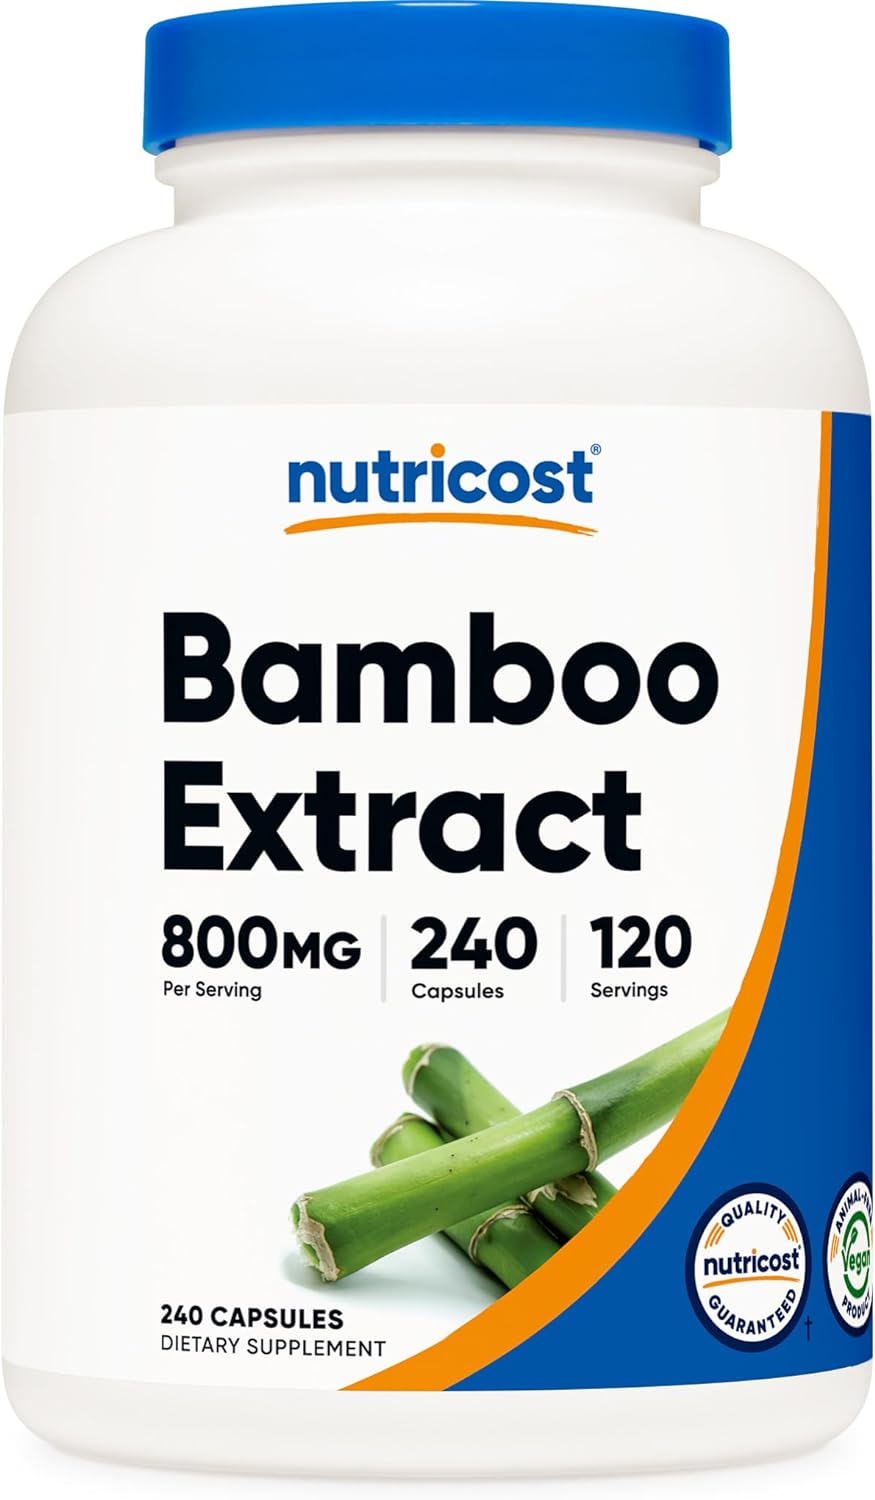 Nutricost Bamboo Extract, 400 mg, 240 Capsules - Vegan, Gluten Free and Non-GMO - 120 Servings with 800 mg